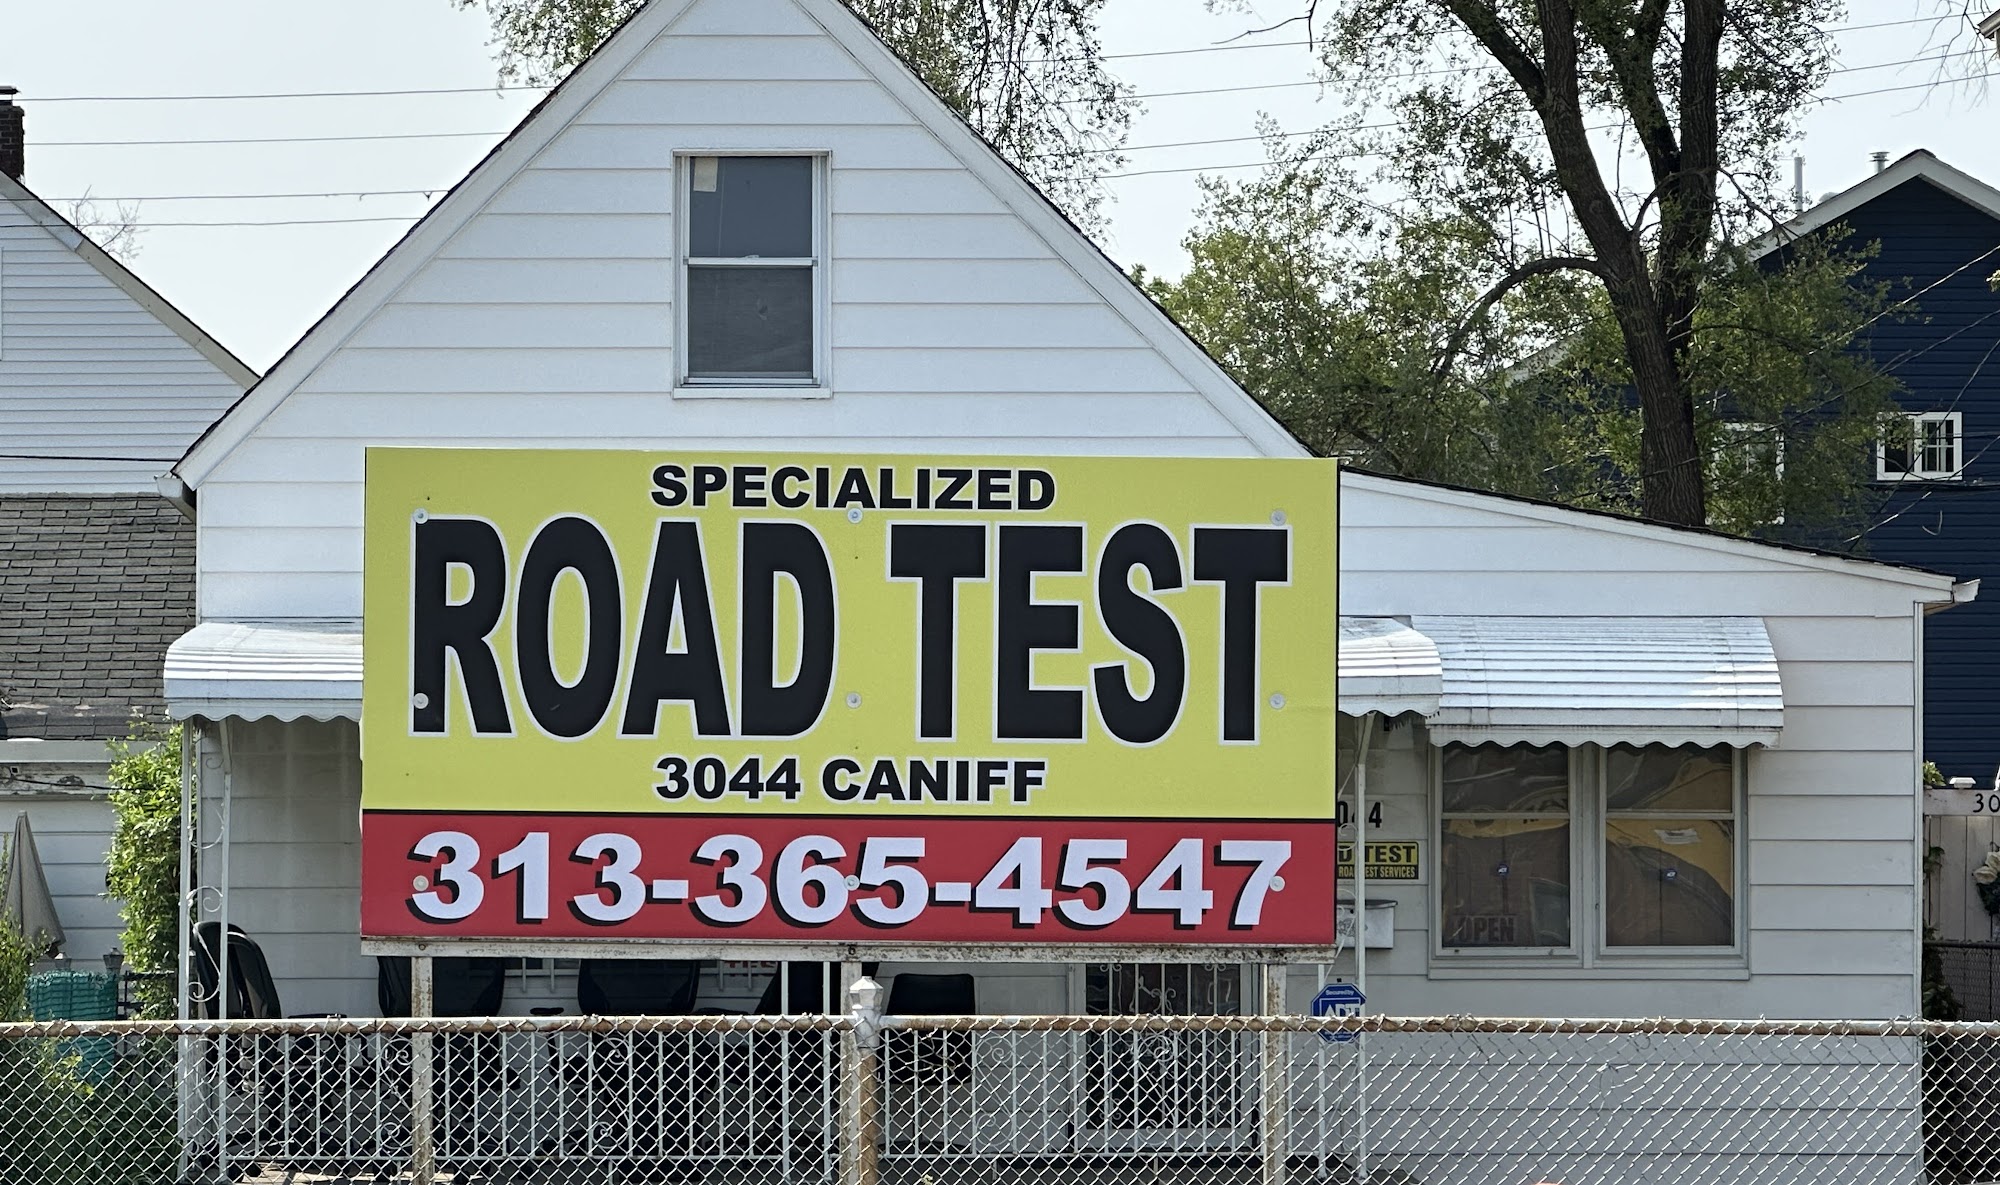 Specialized Road Test Services